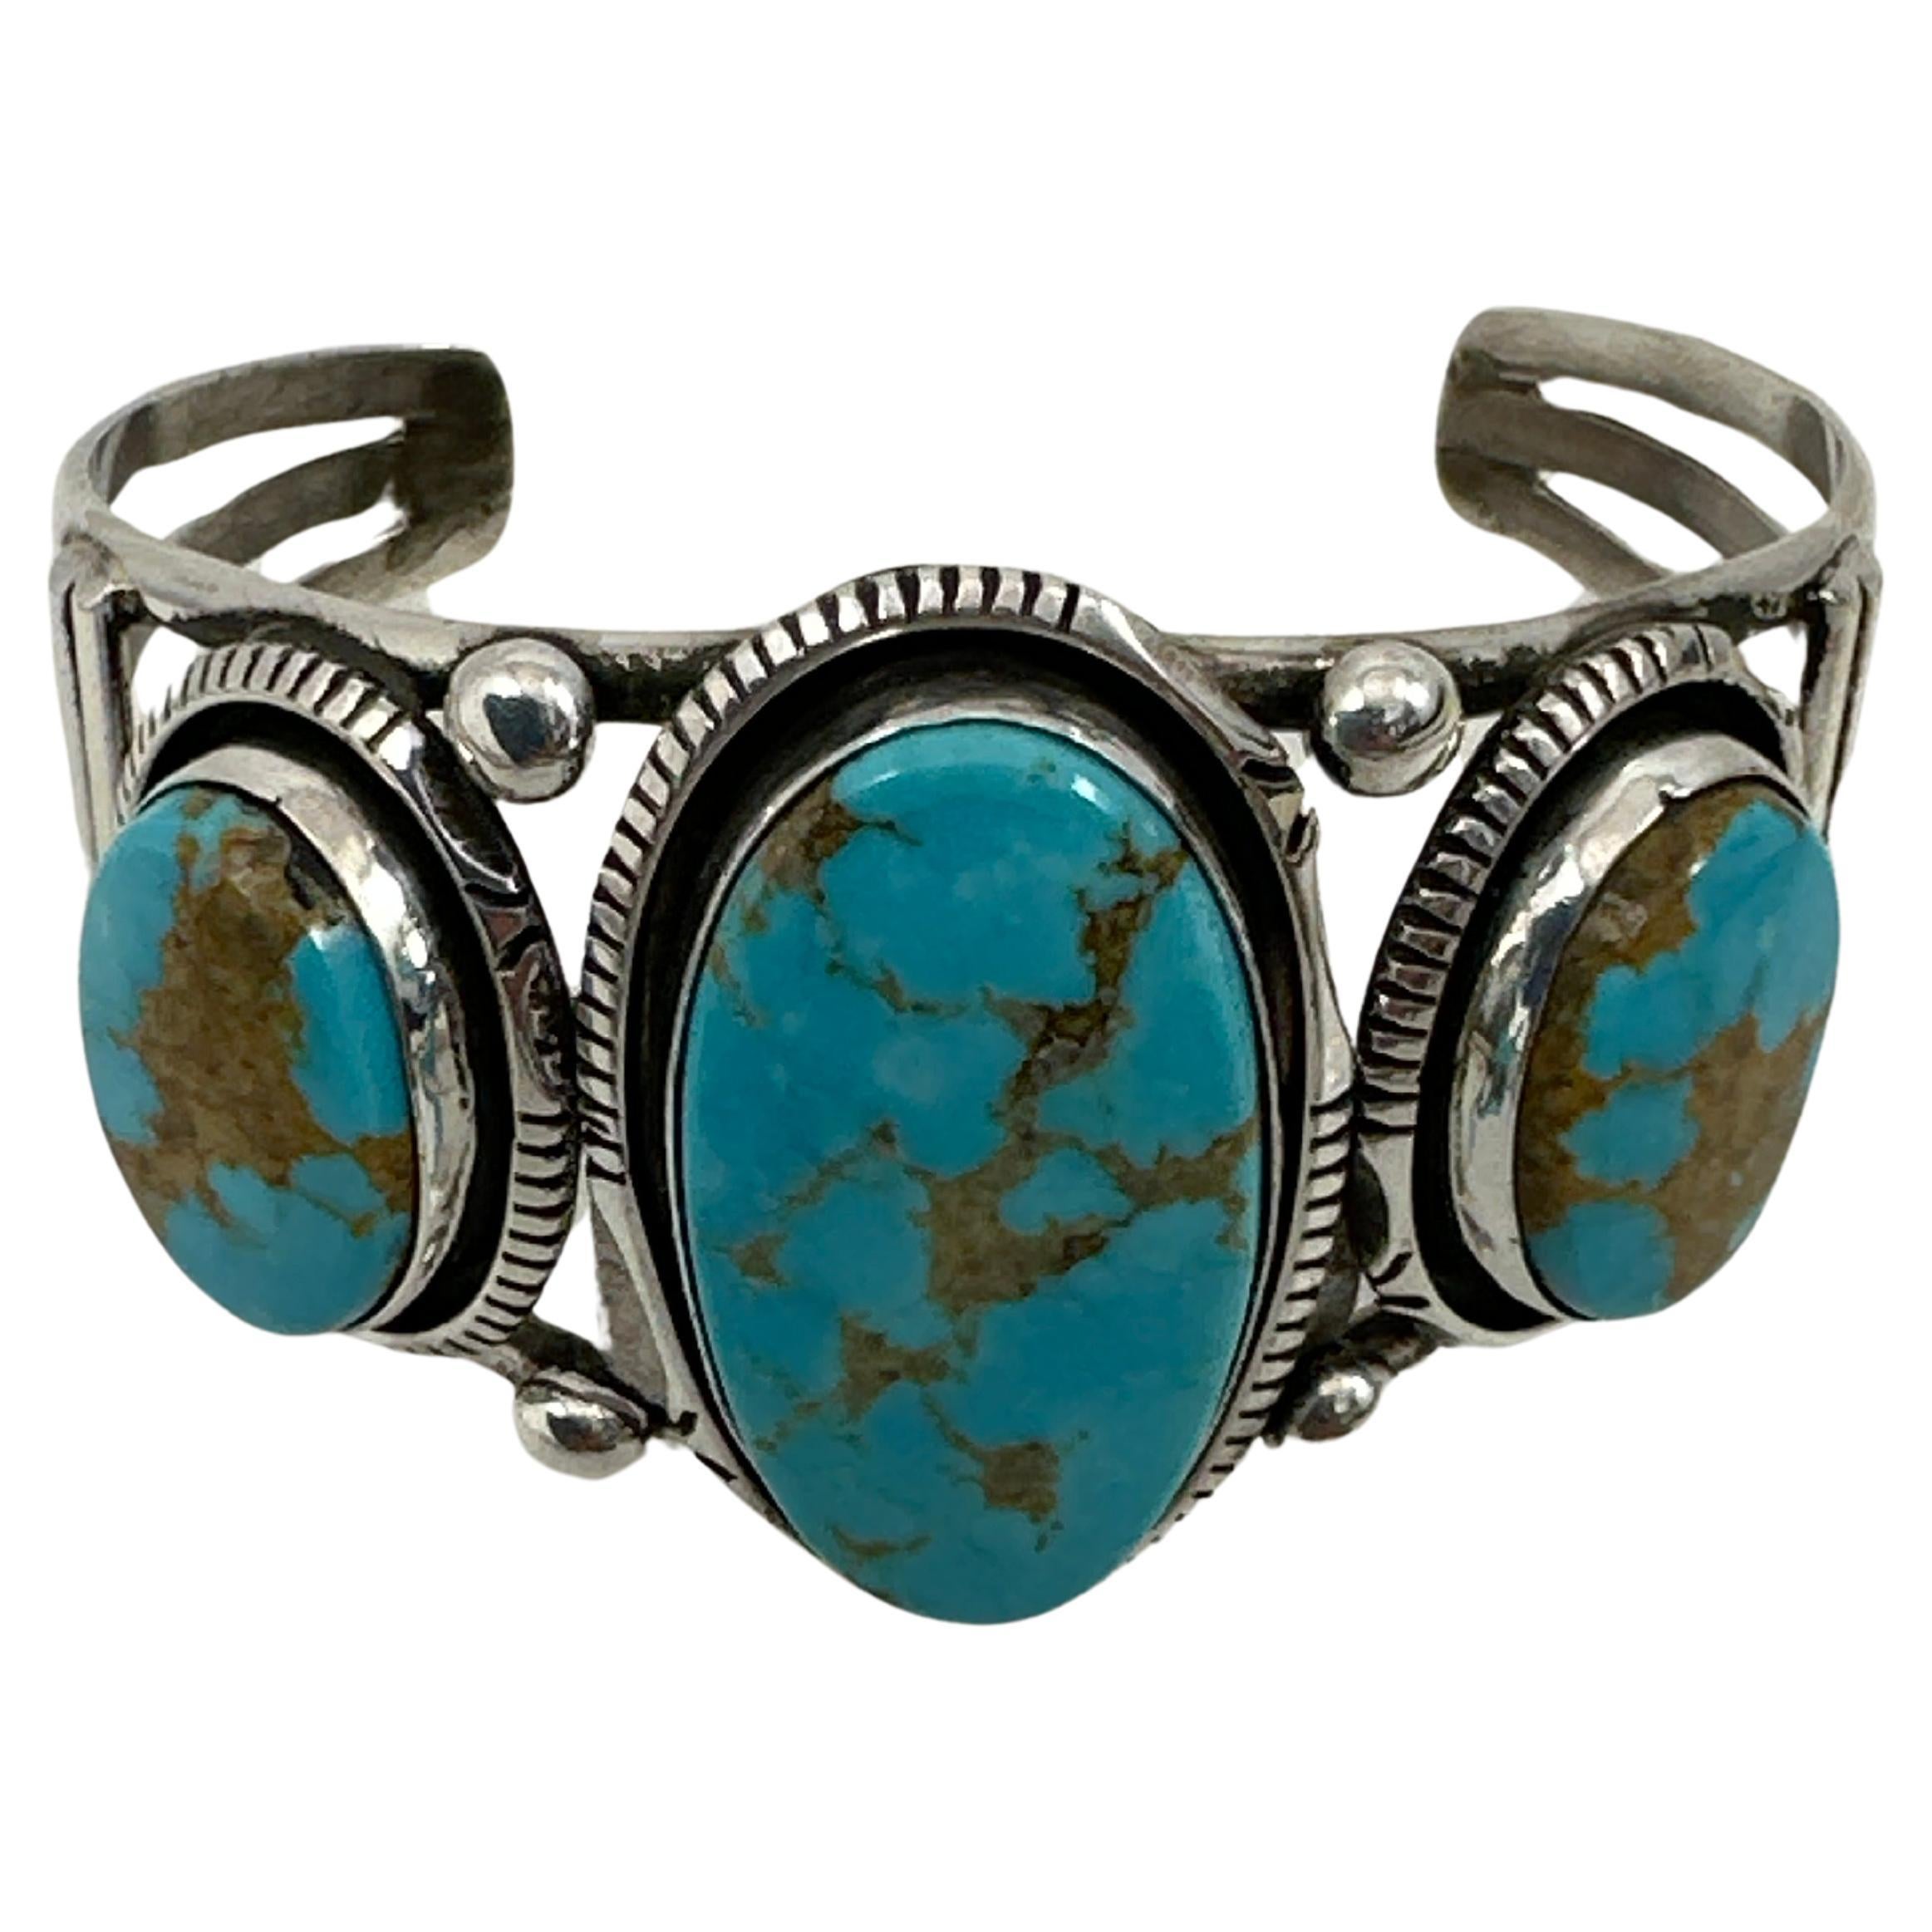 Navajo Sterling Silver .925 ~ Sleeping Beauty Turquoise Cuff Bracelet ~Signed by Augustine Largo
2 1/2